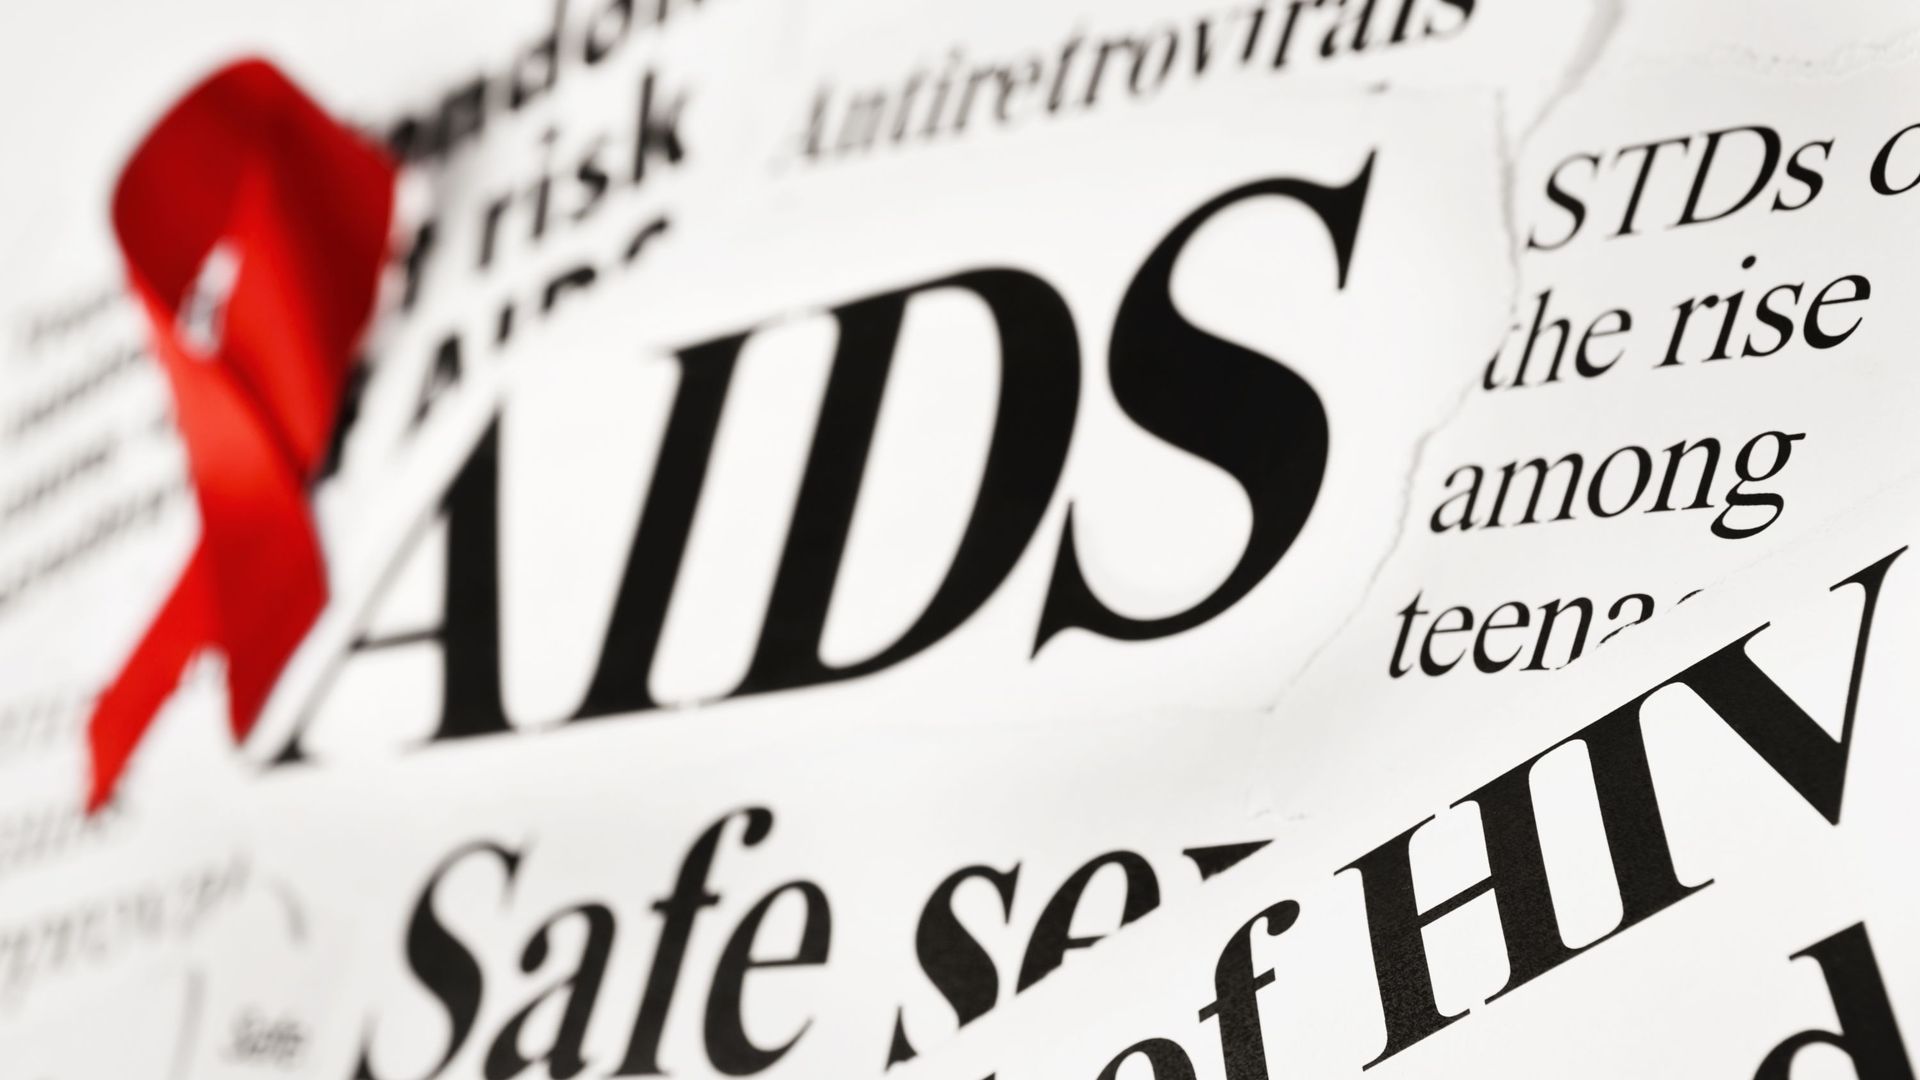 40 years after the discovery of HIV, where are we today?